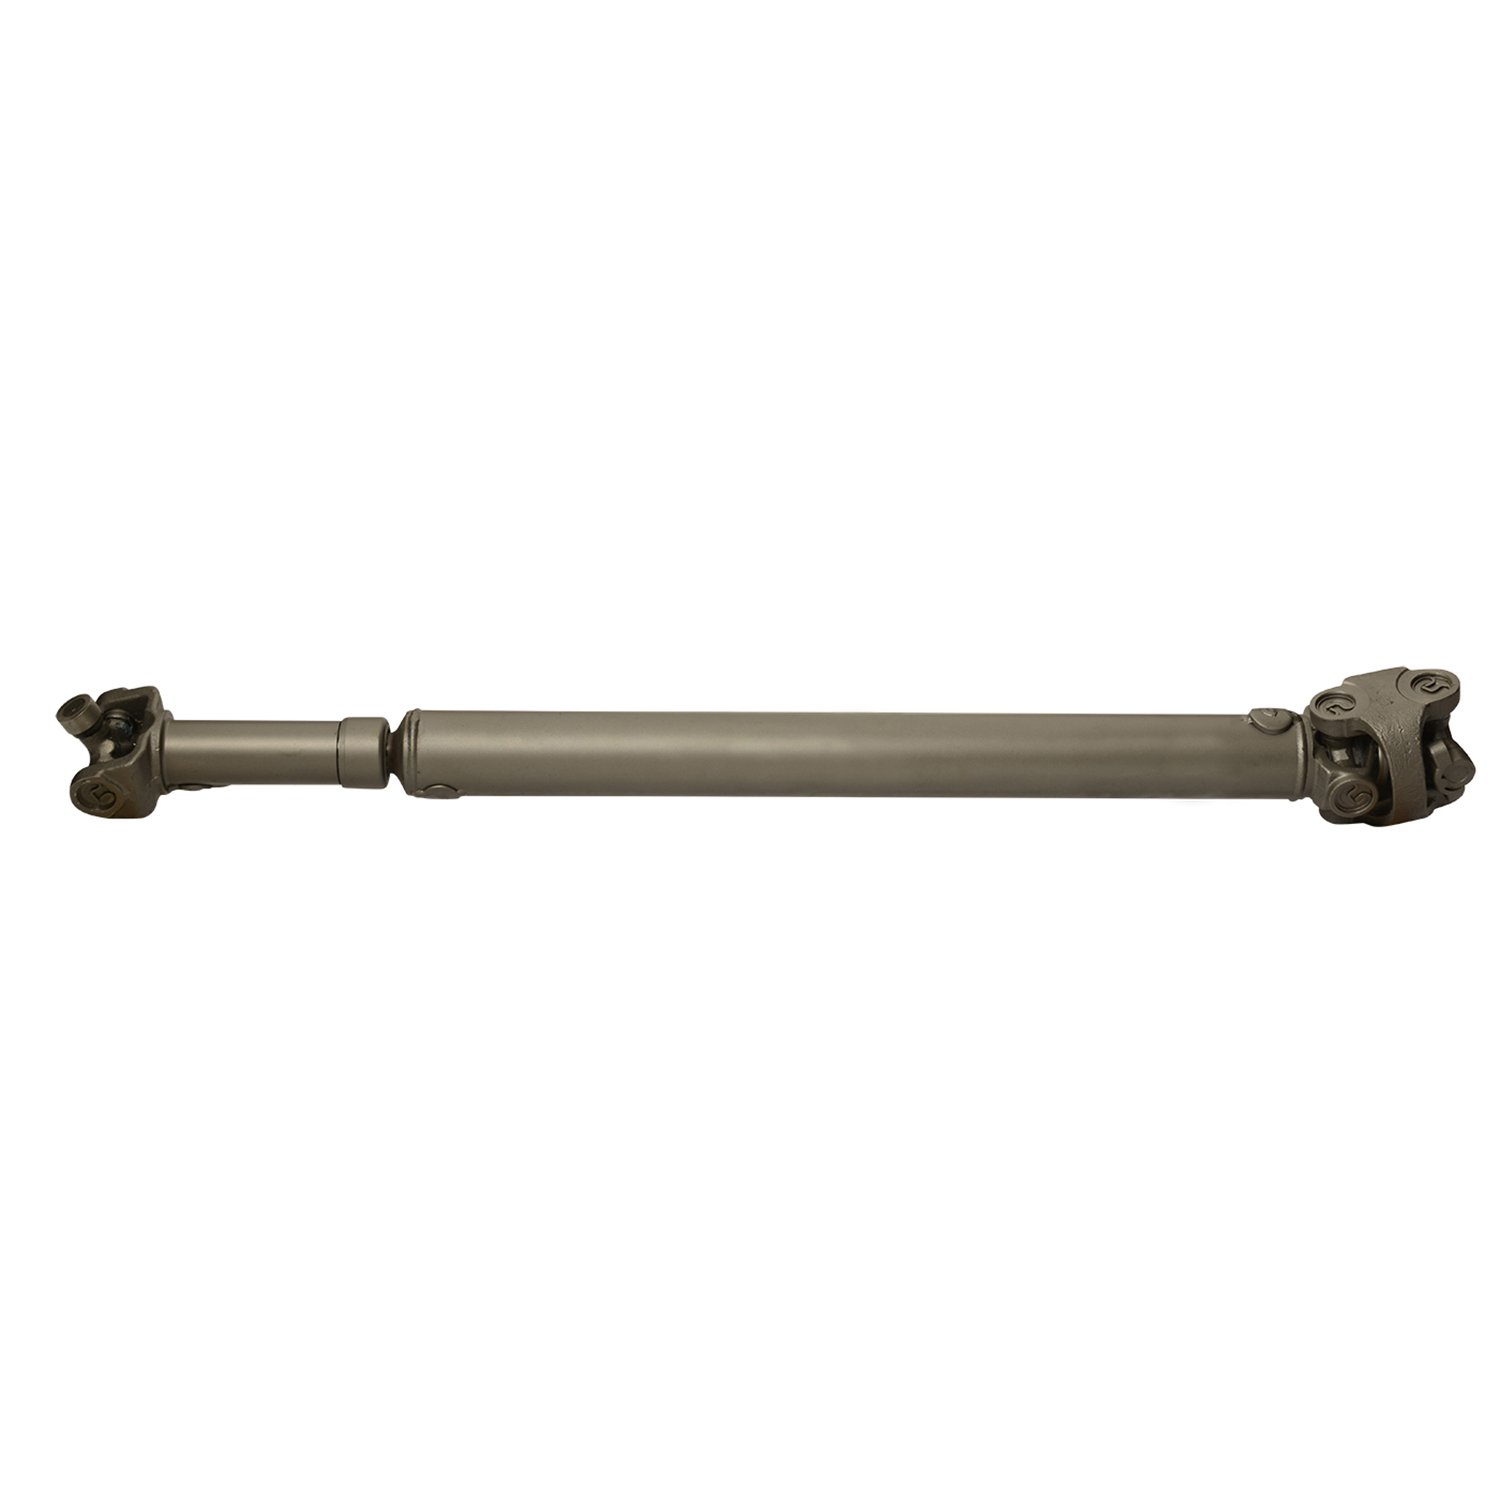 USA Standard ZDS9161 Front Driveshaft, For Bronco, F250 & F350, 24.375 in. Center-To-Center